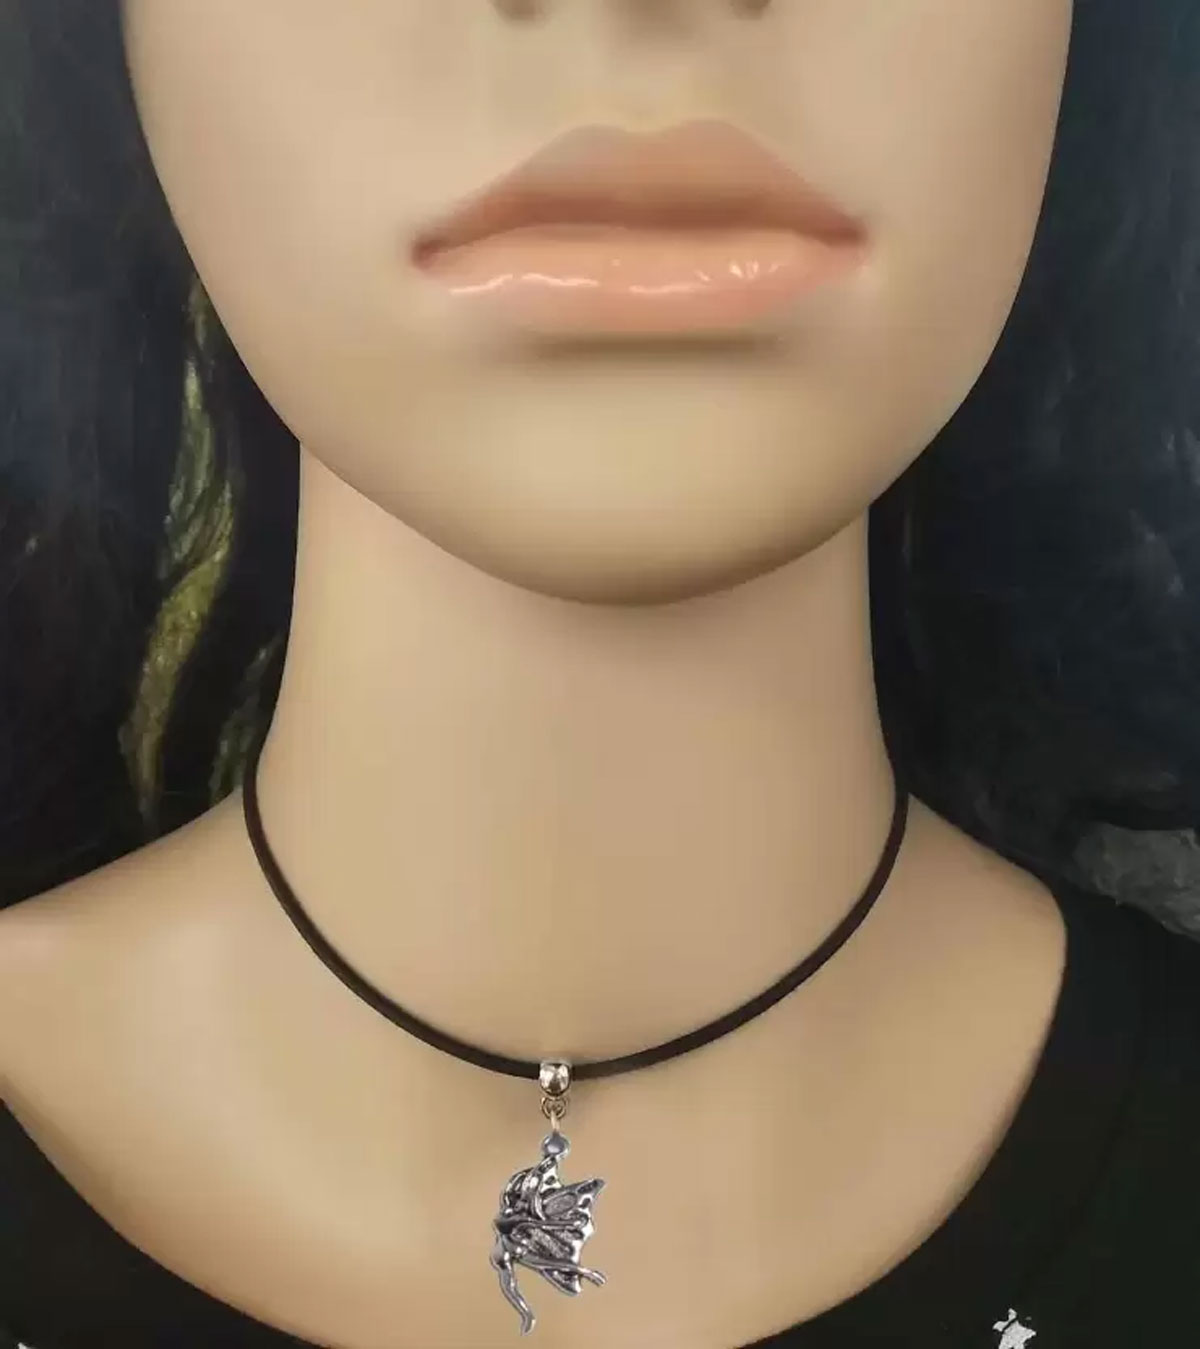 what is the significance of black thread on neck